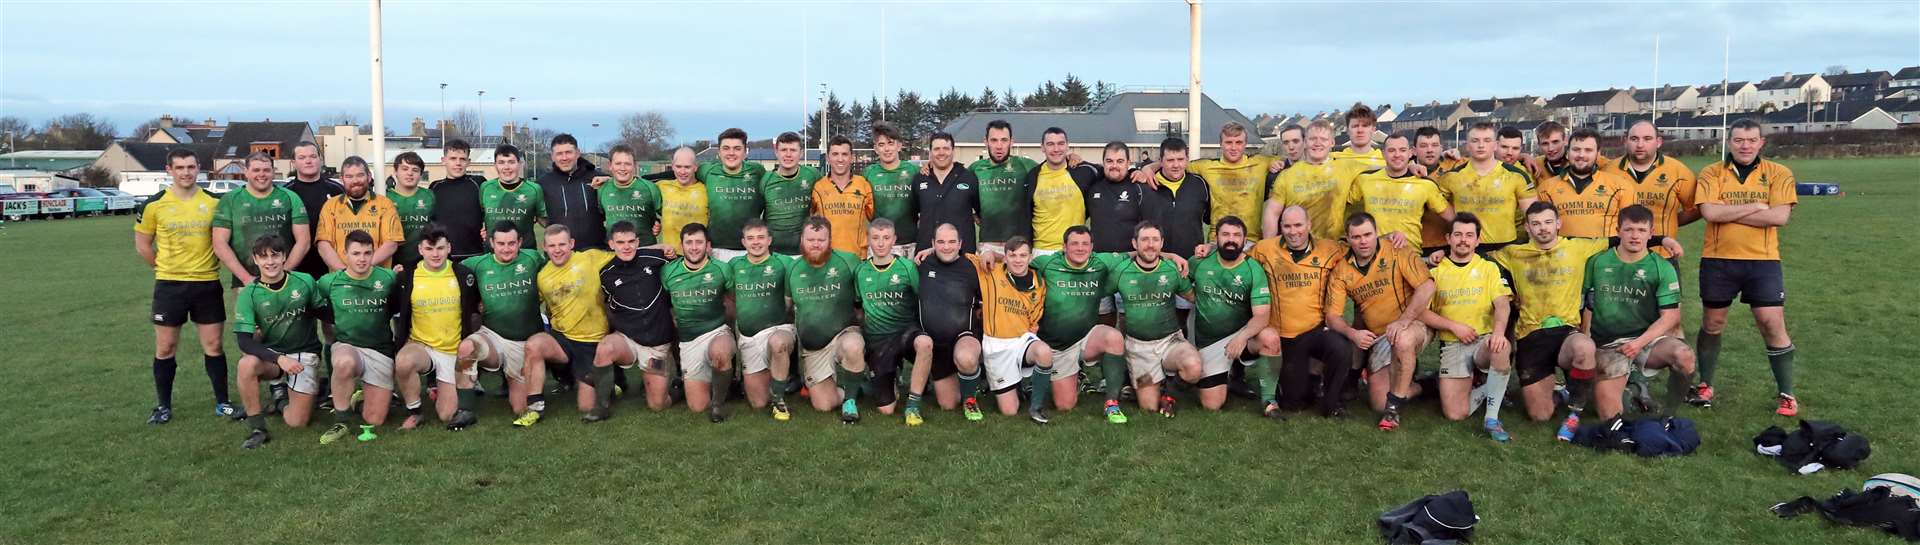 The Caithness and Exiles teams at the end of the well-attended Boxing Day match at Millbank, Thurso. Picture: James Gunn